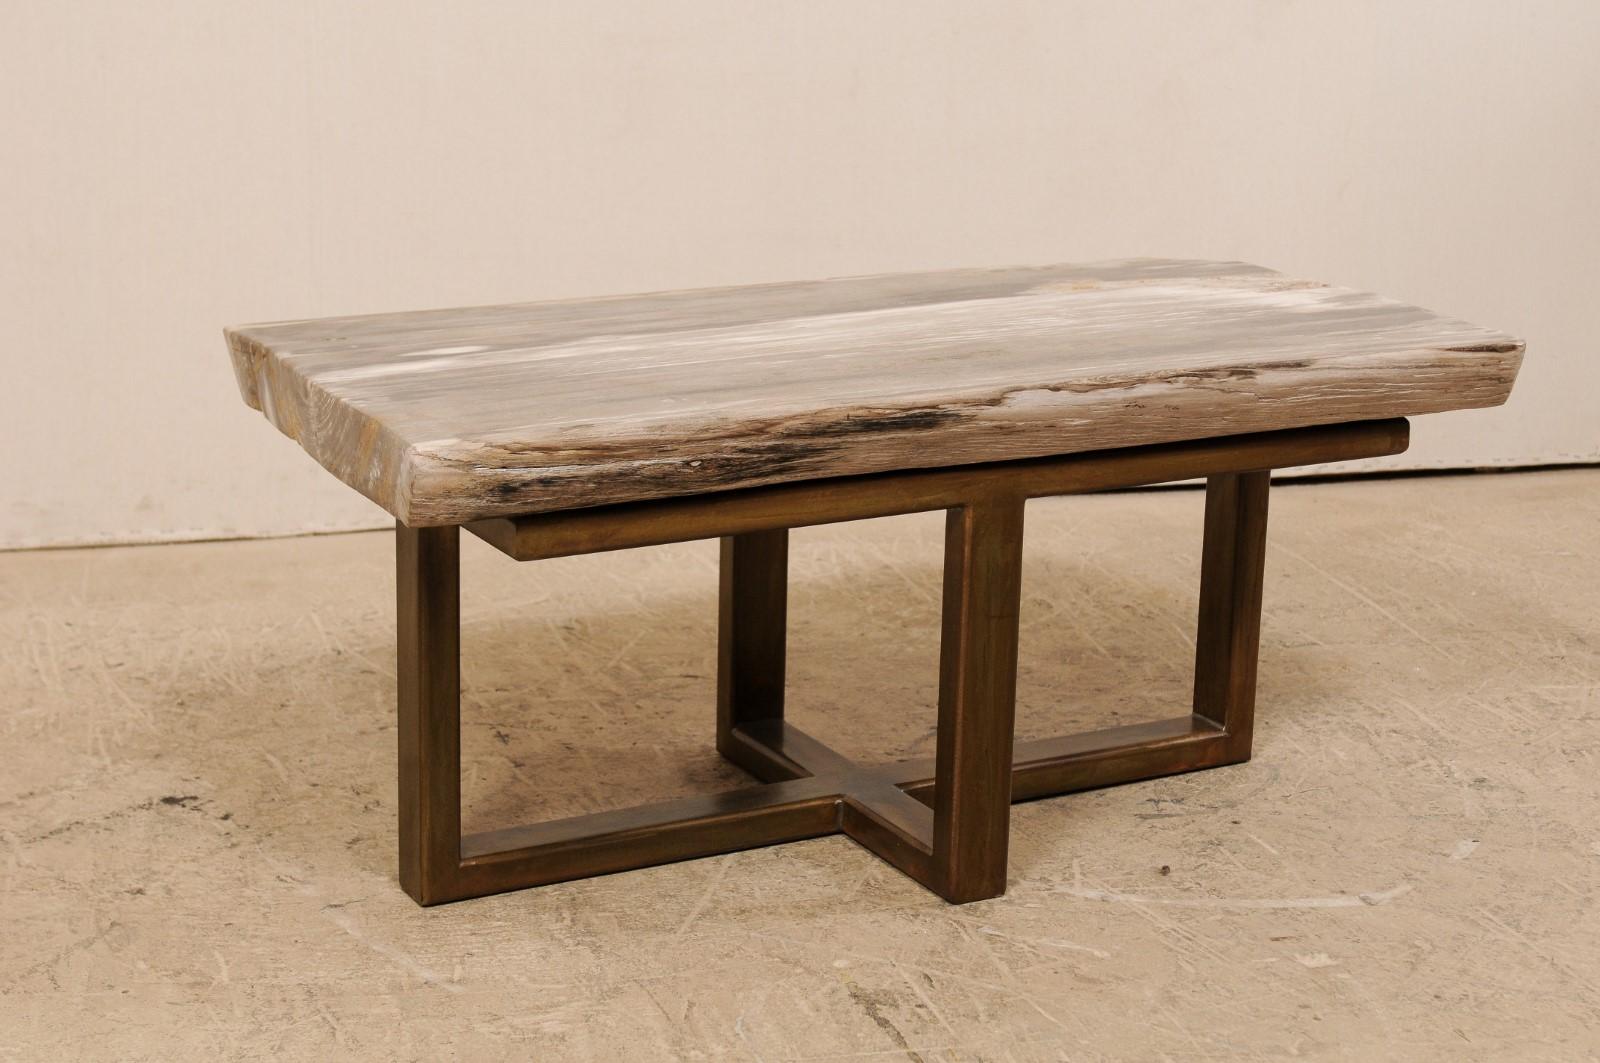 A petrified wood top modernly designed coffee table (or bench). This custom coffee table has been fashioned from a gorgeous single thick slab of smoothly polished petrified wood, with an overall rectangular-shape, approximately 3.5 feet in length.